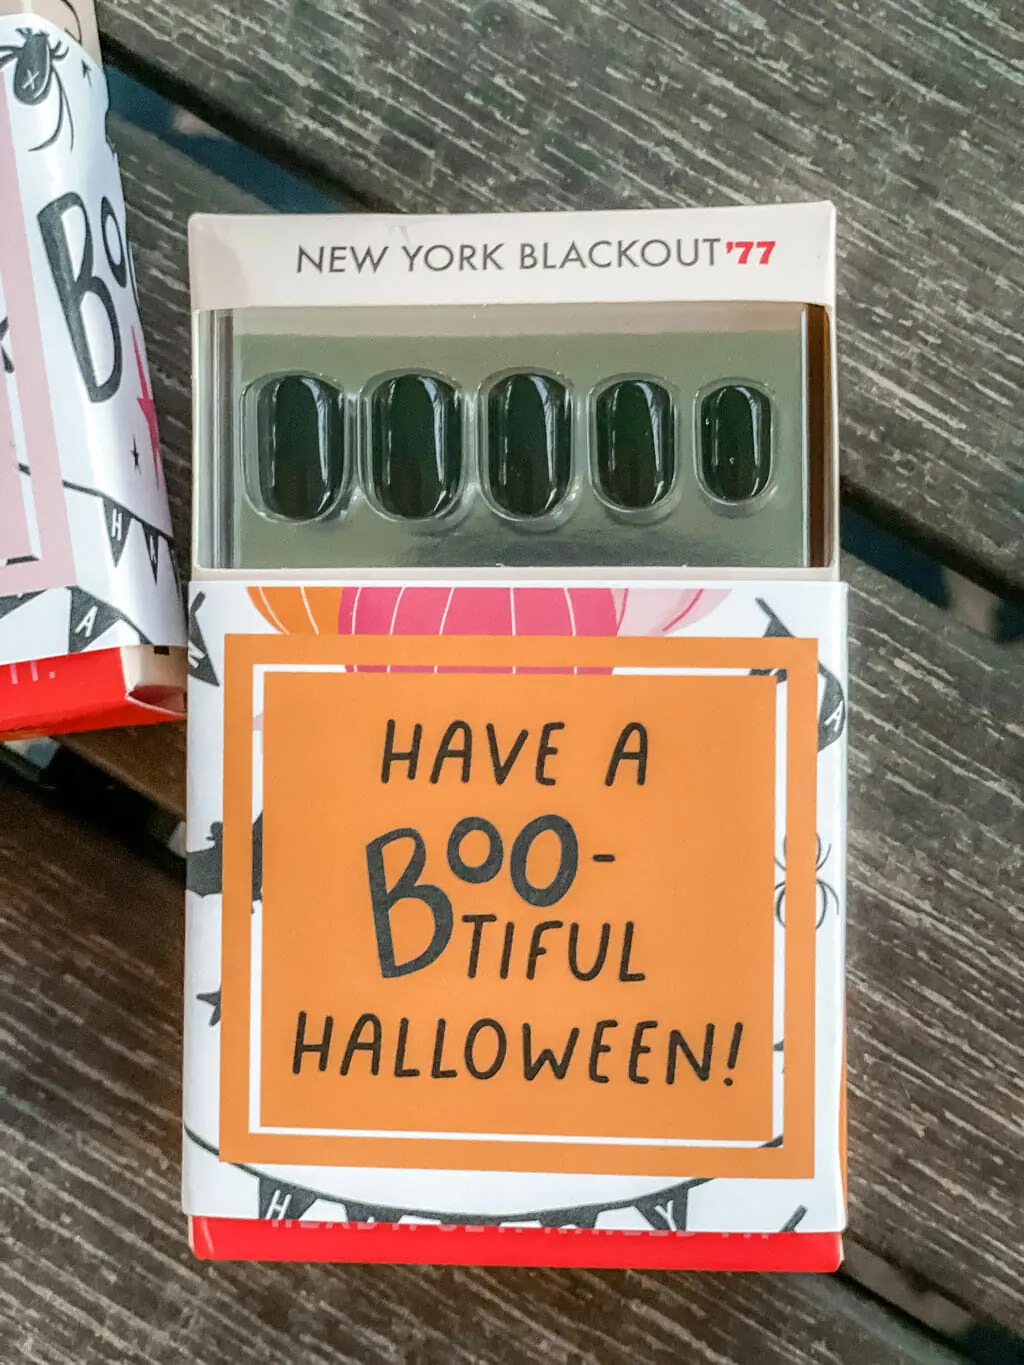 New York Blackout Hello Love Inc. press on nails in package with printable gift tag wrapped around the box.